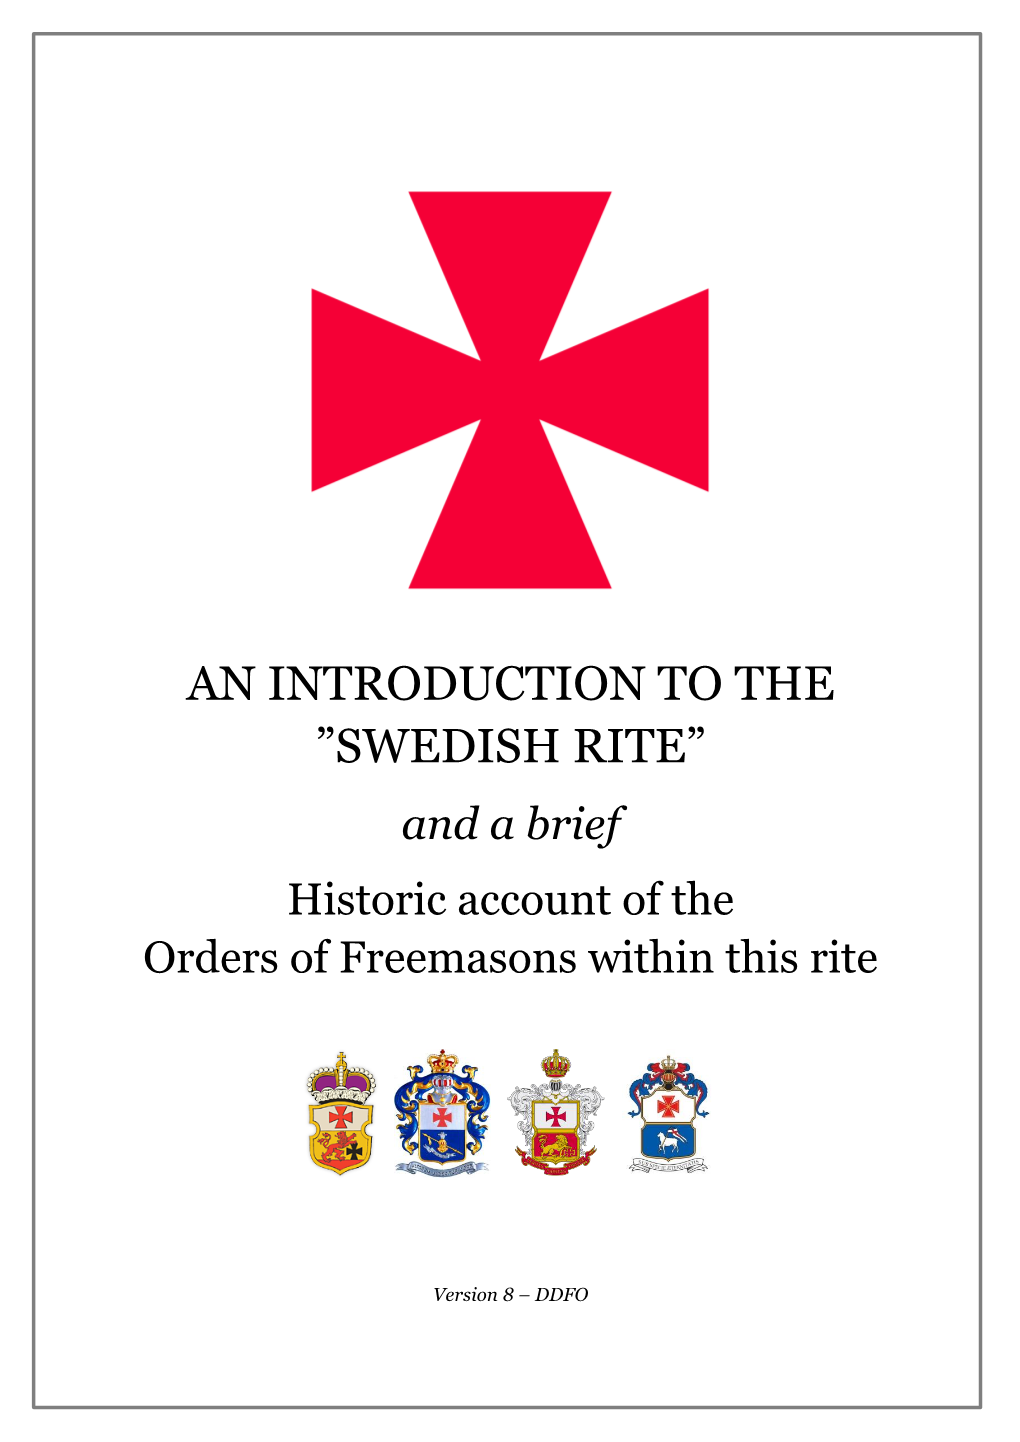 AN INTRODUCTION to the ”SWEDISH RITE” and a Brief Historic Account of the Orders of Freemasons Within This Rite